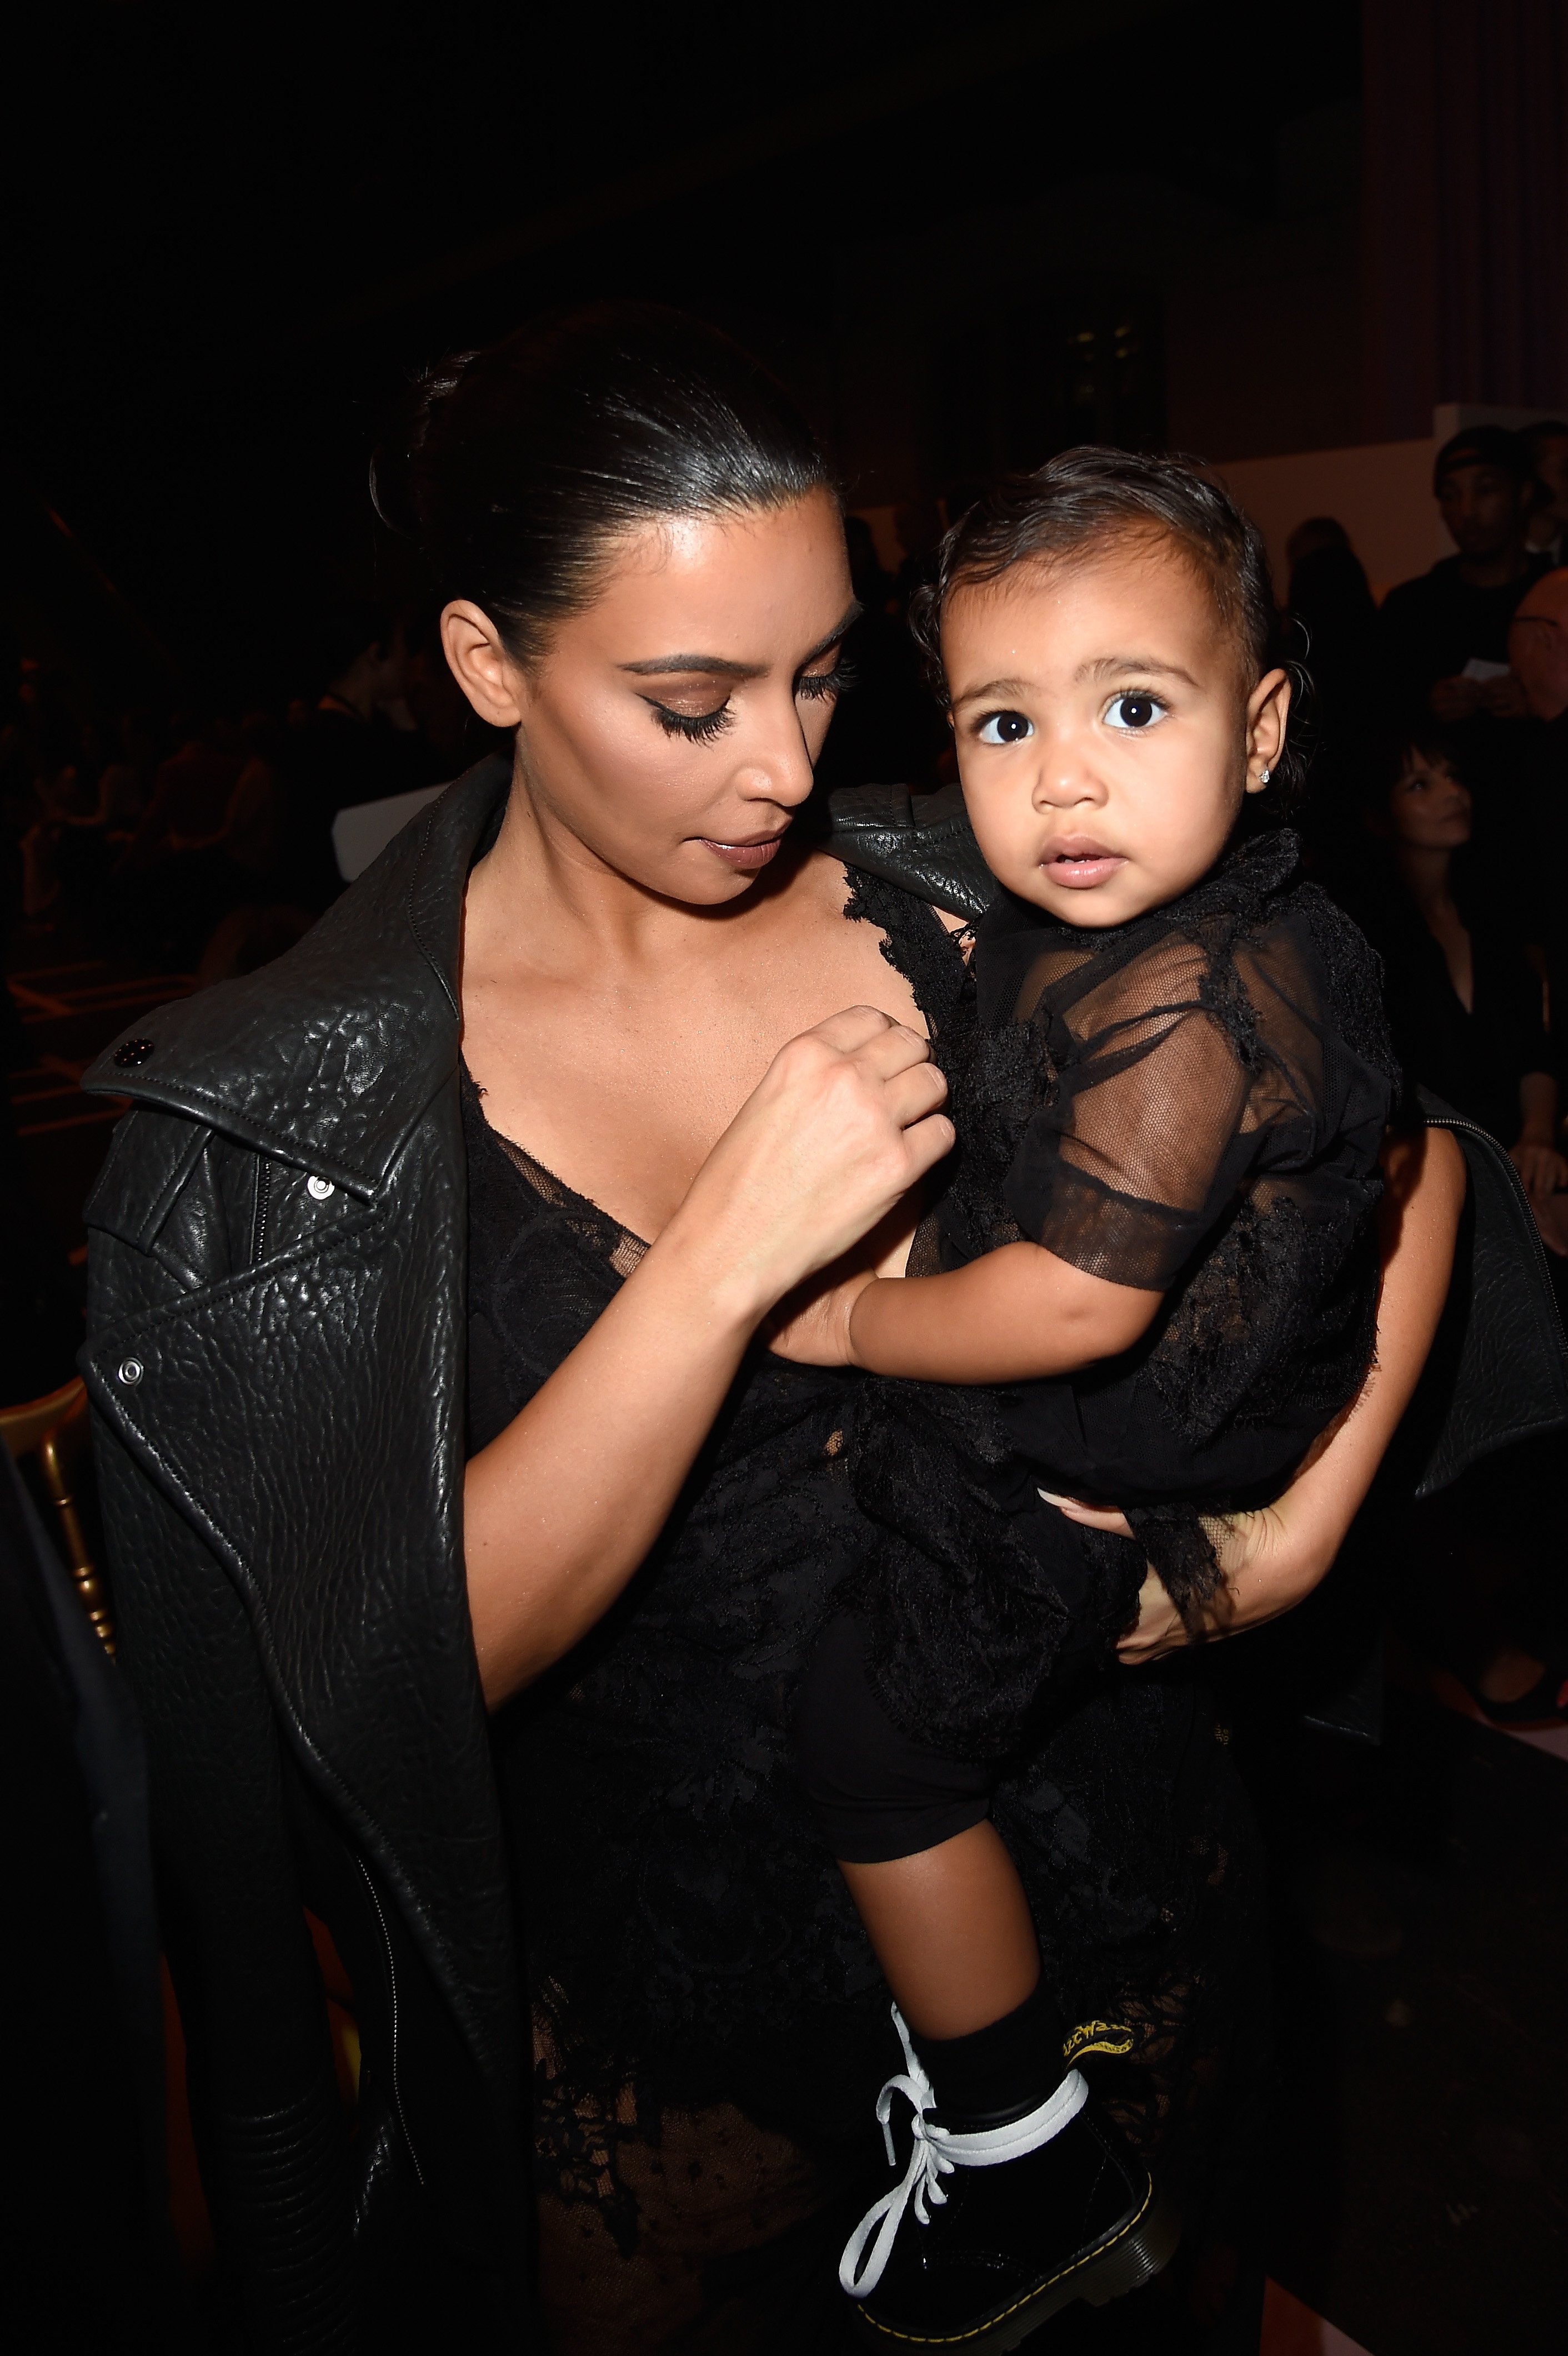 Kim Kardashian and baby North West at the Givenchy show as part of the Paris Fashion Week | Source: Getty Images